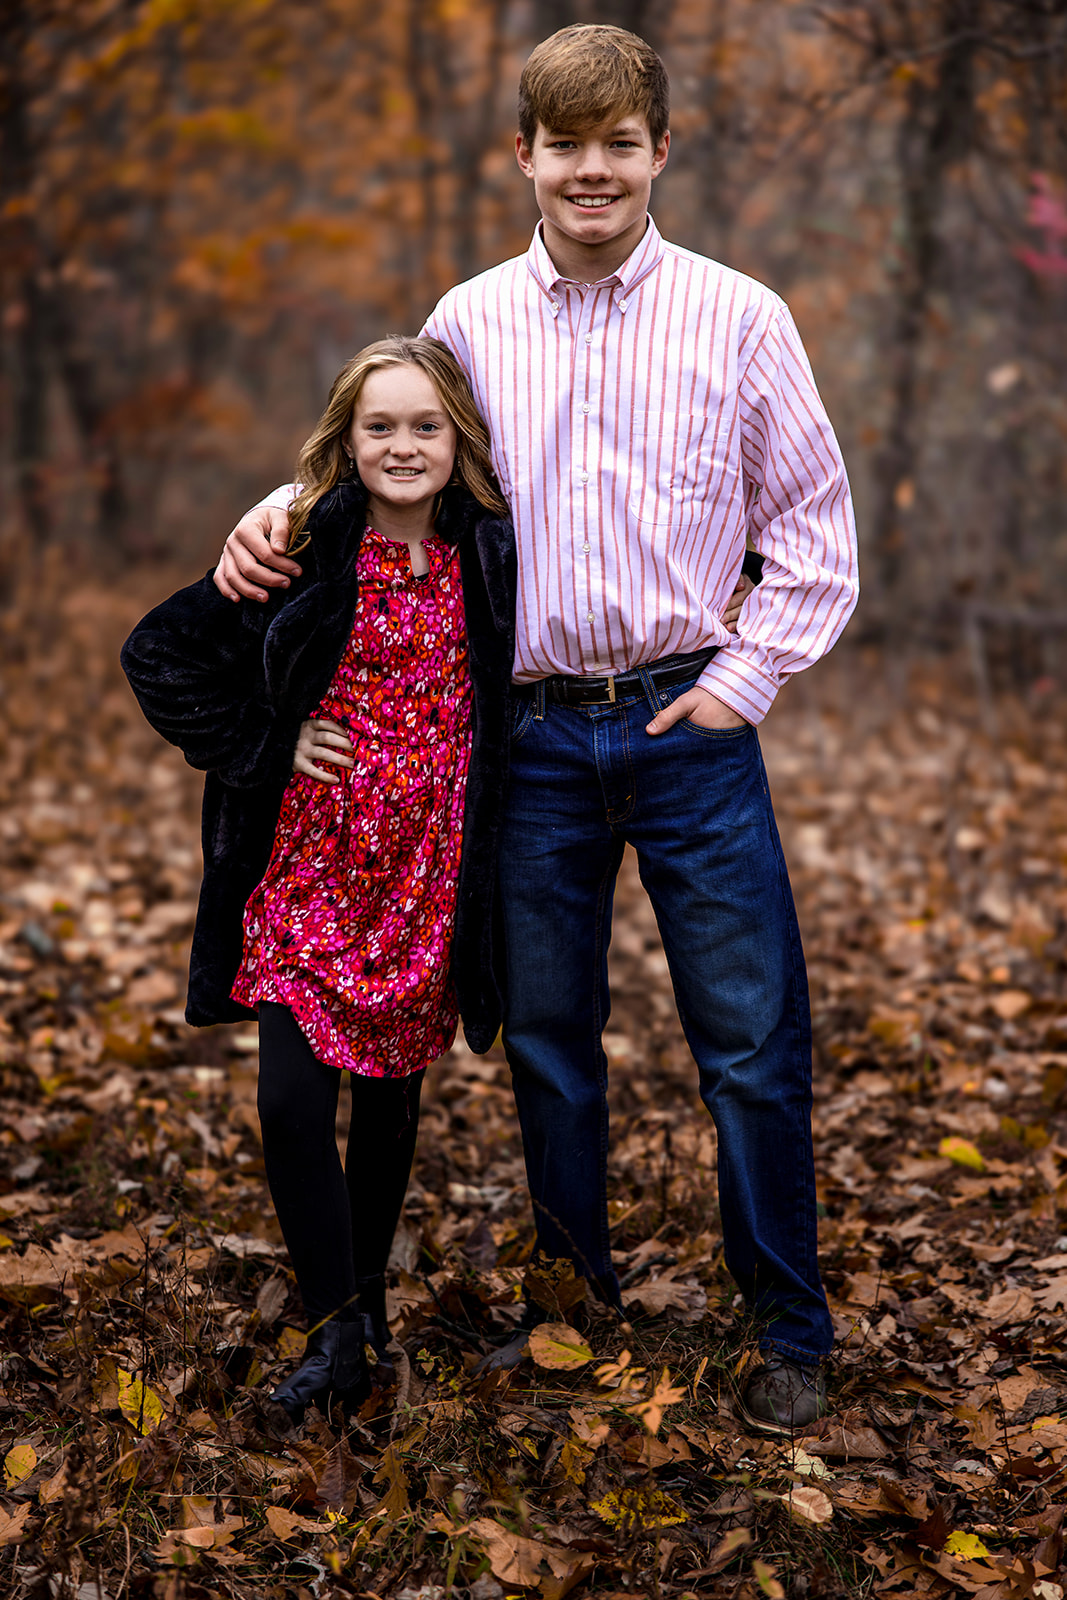 Falling Leaves, Loving Smiles: West Salem Family Photos by Jeff Wiswell of J.L. Wiswell Photography of Onalaska, WI